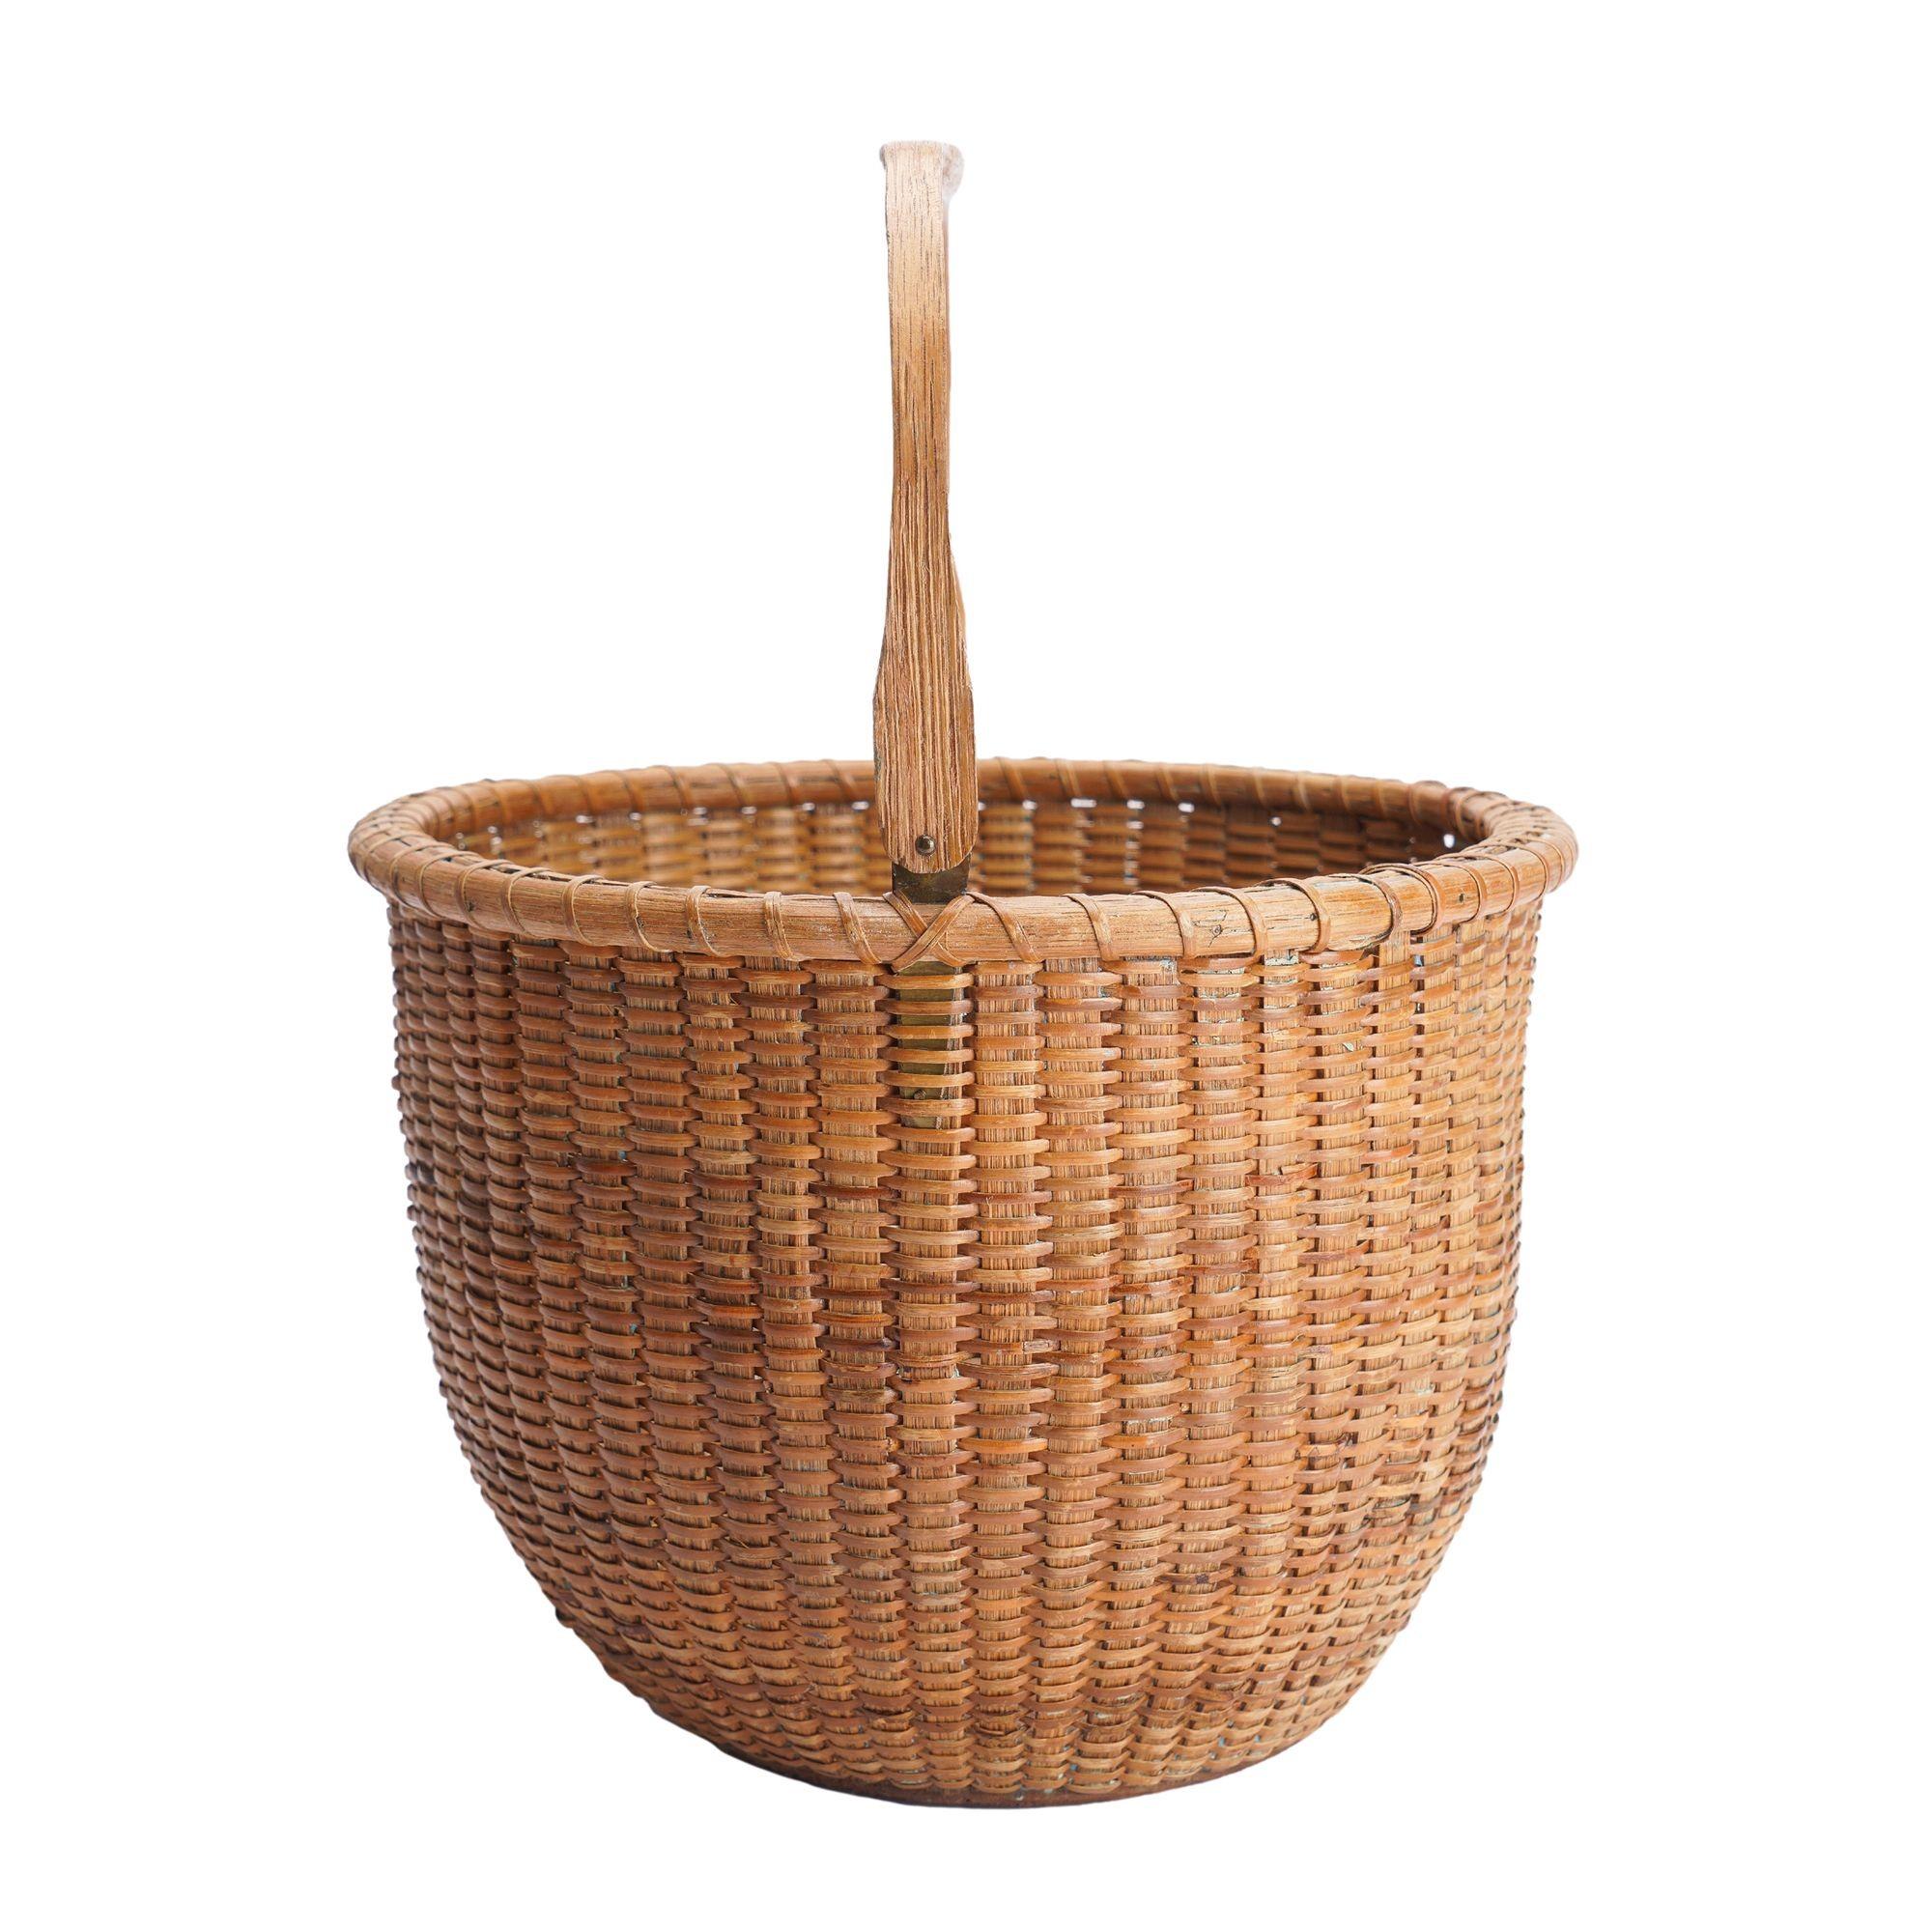 American Nantucket lighthouse basket attributed to Mitchy Ray, 1900-50 For Sale